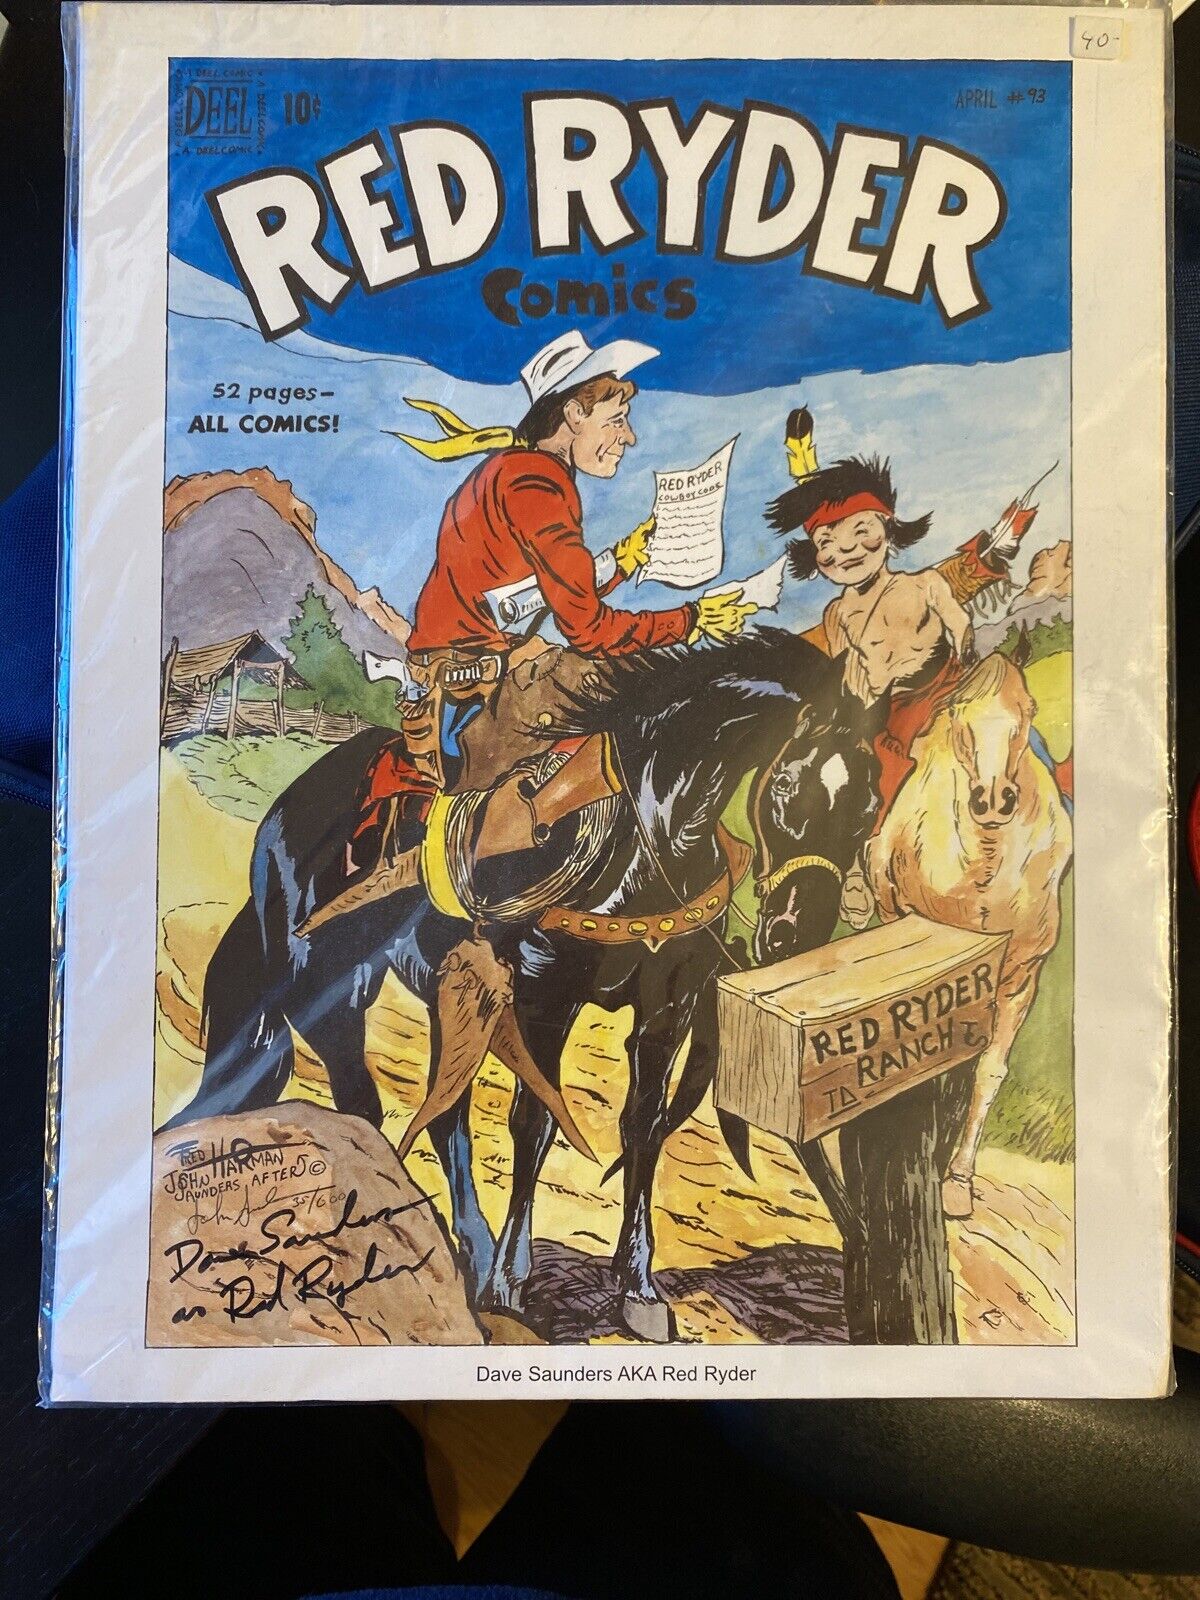 Red Ryder Comics Print 11 X 14 Poster Signed By Dave Saunders